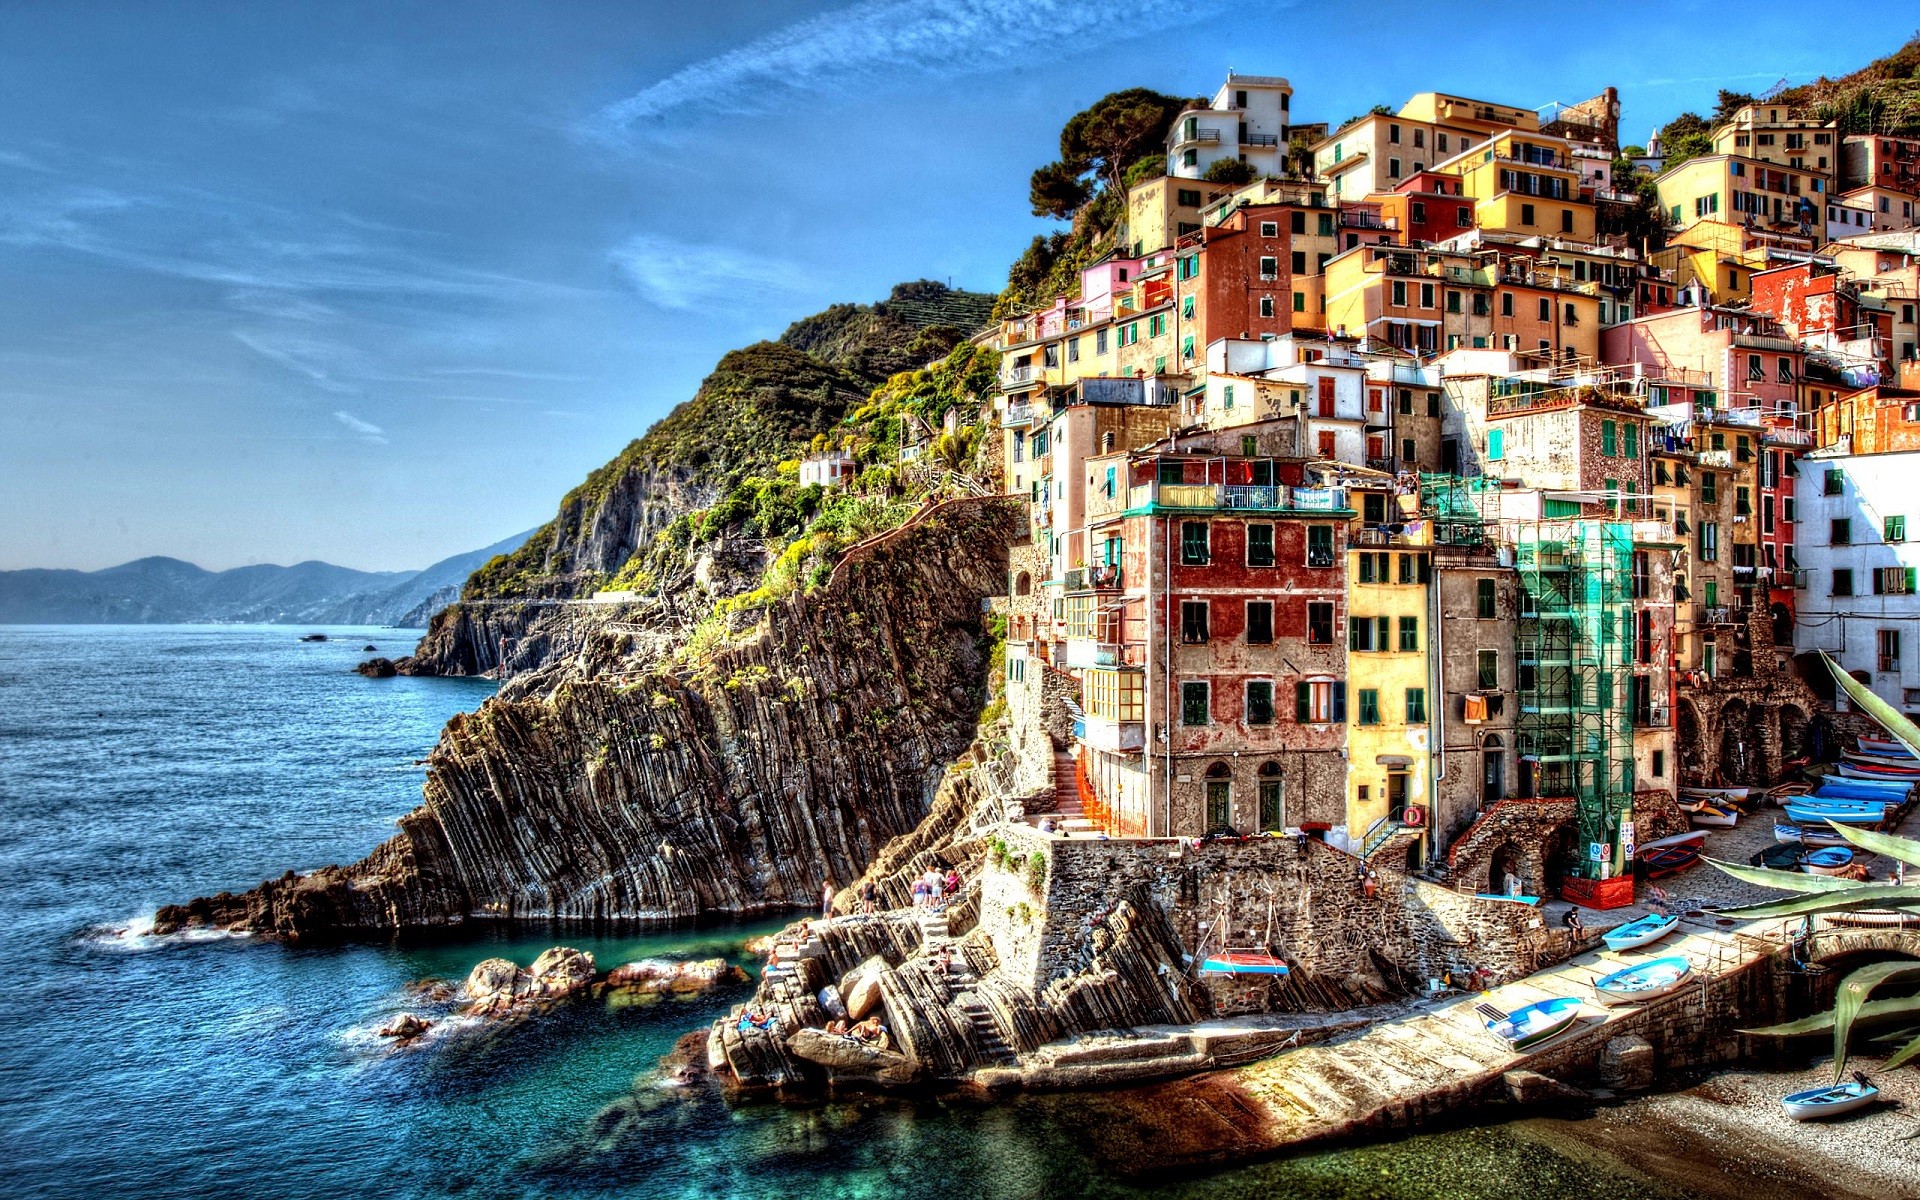 General 1920x1200 Cinque Terre Italy sea city dock boat building colorful hills cliff town